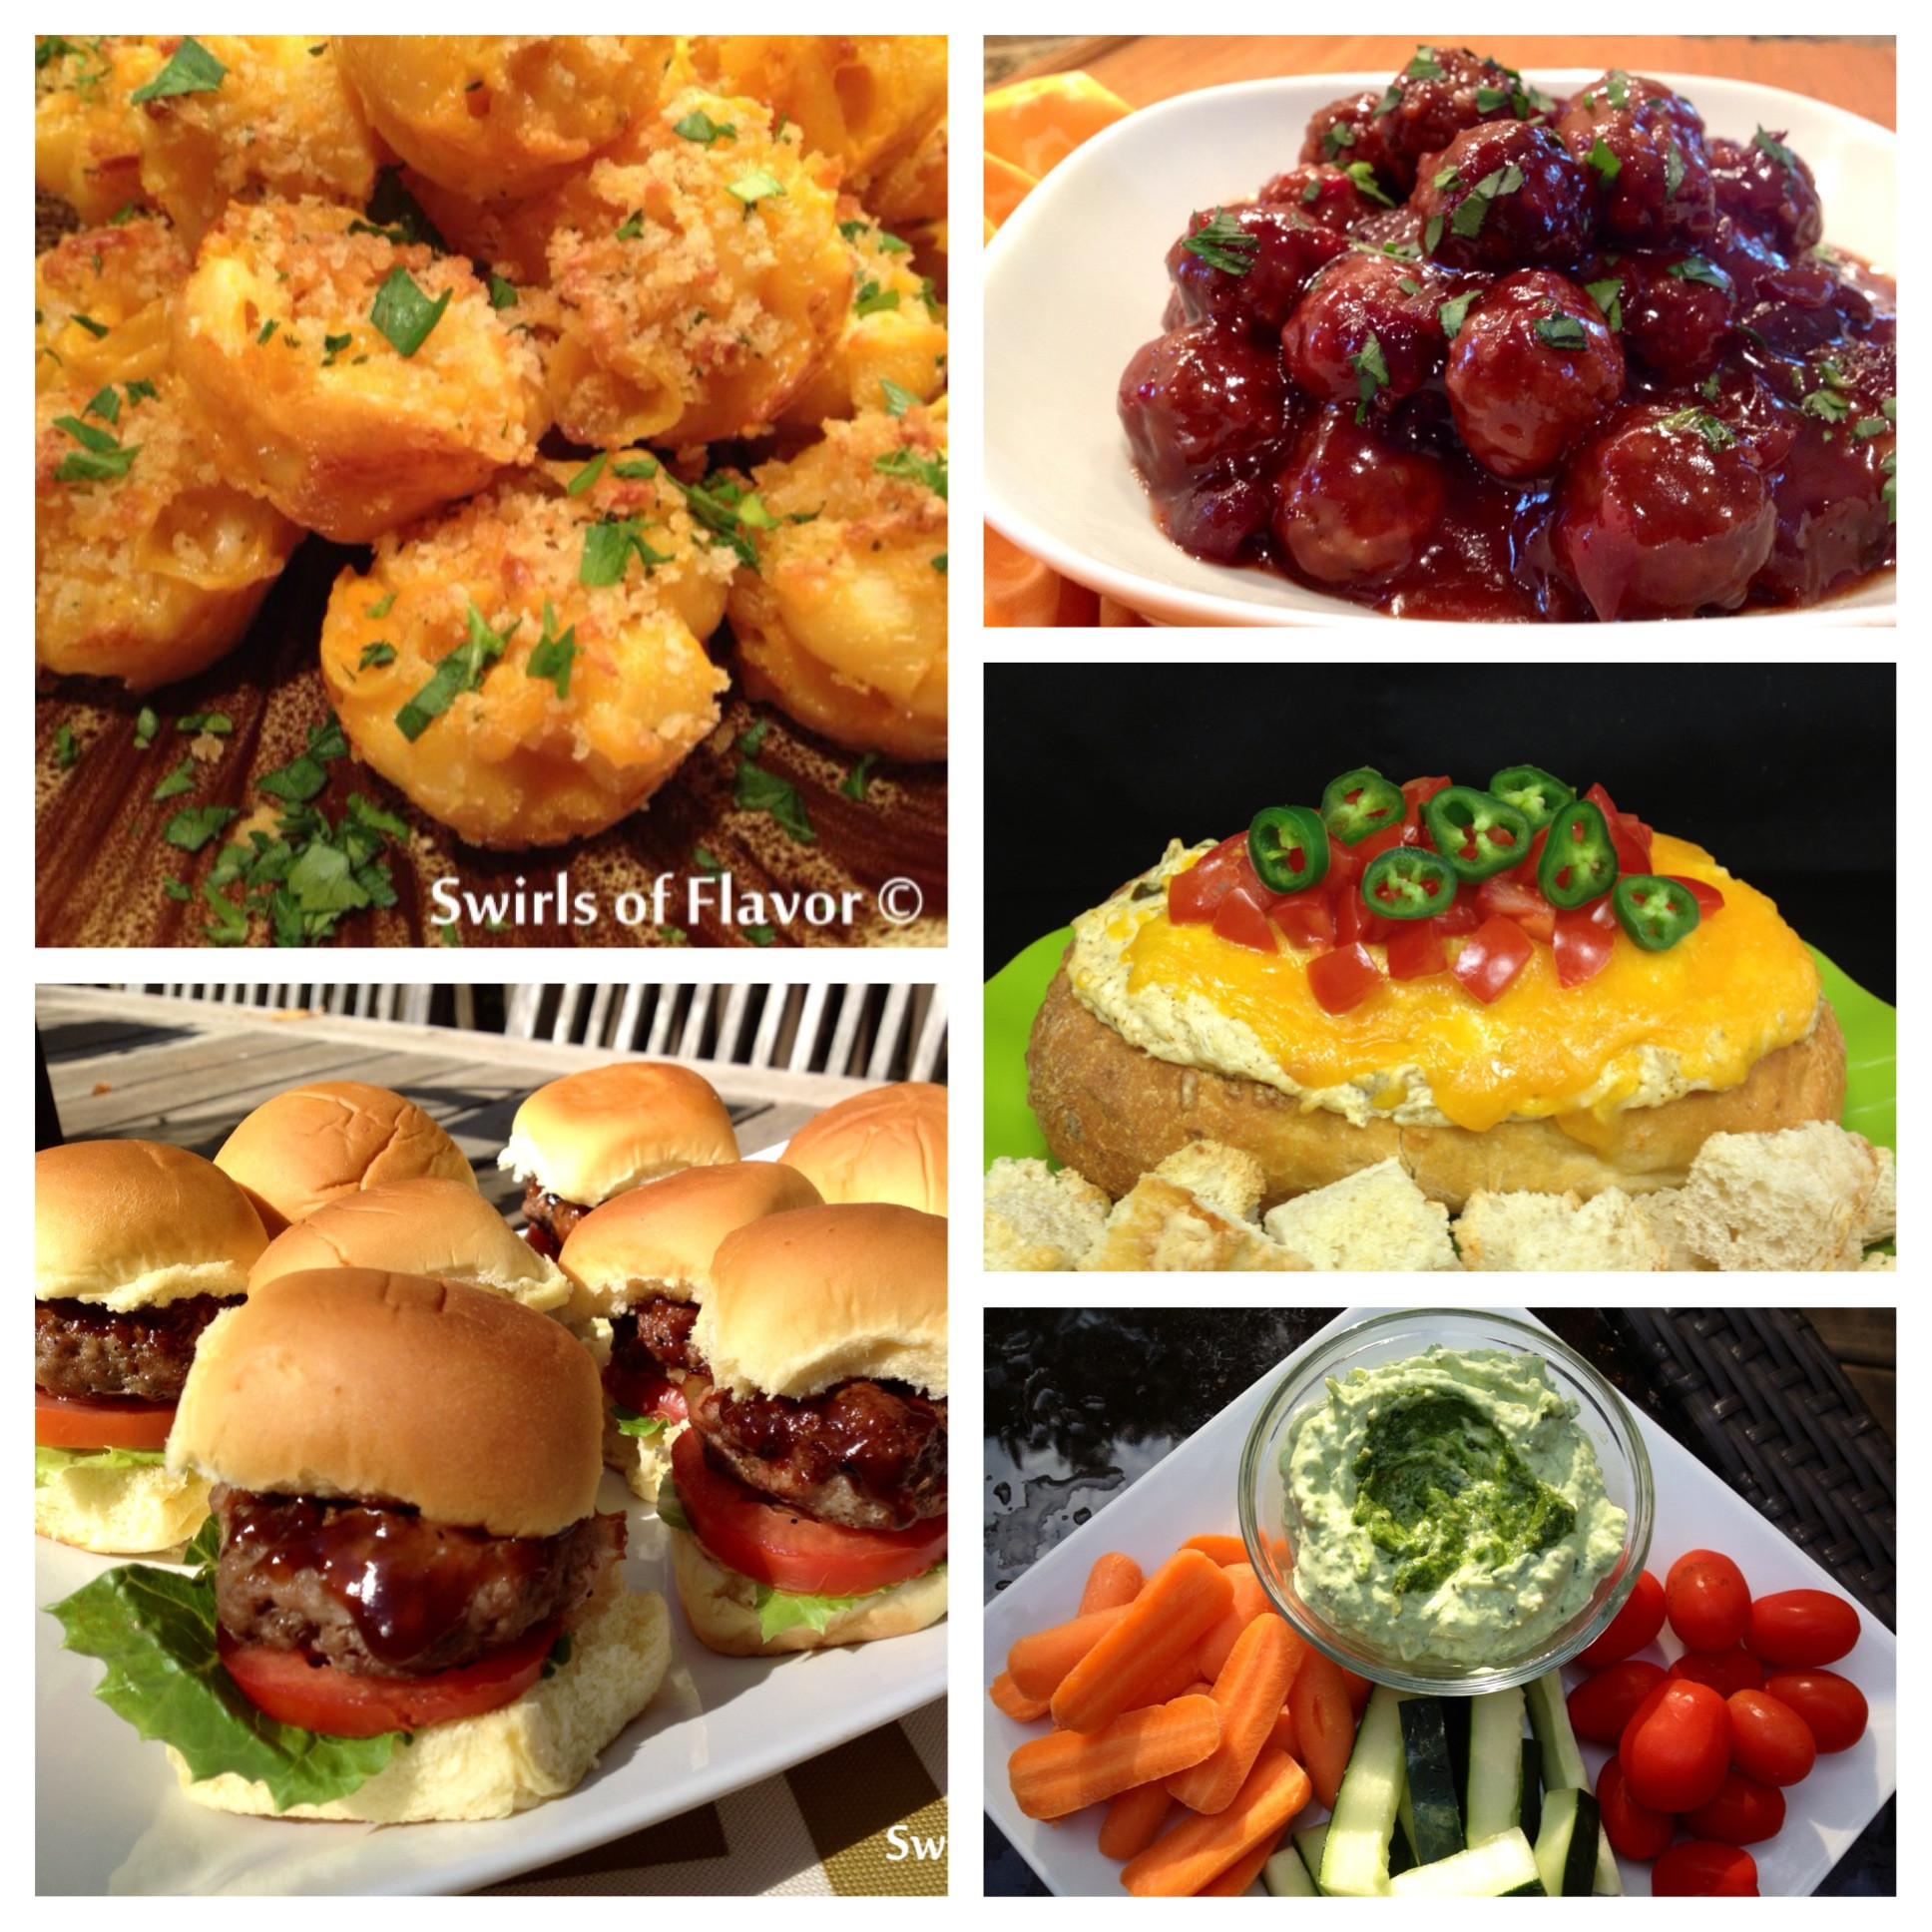 Recipes For Super Bowl Appetizers
 Best Ever Super Bowl Recipe Roundup Swirls of Flavor